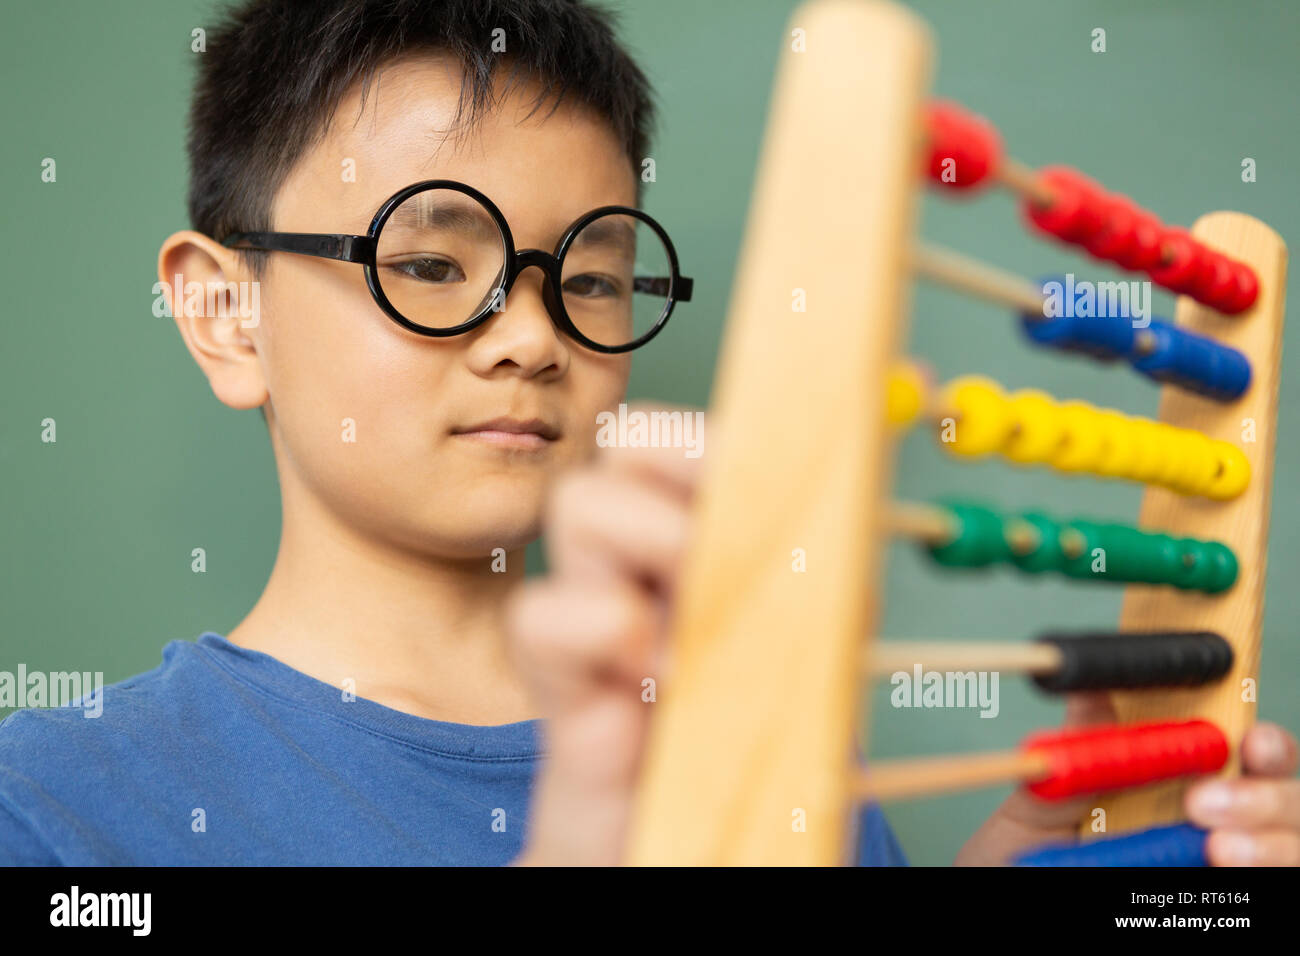 Boy learning math with abacus against green chalkboard in a classroom Stock Photo